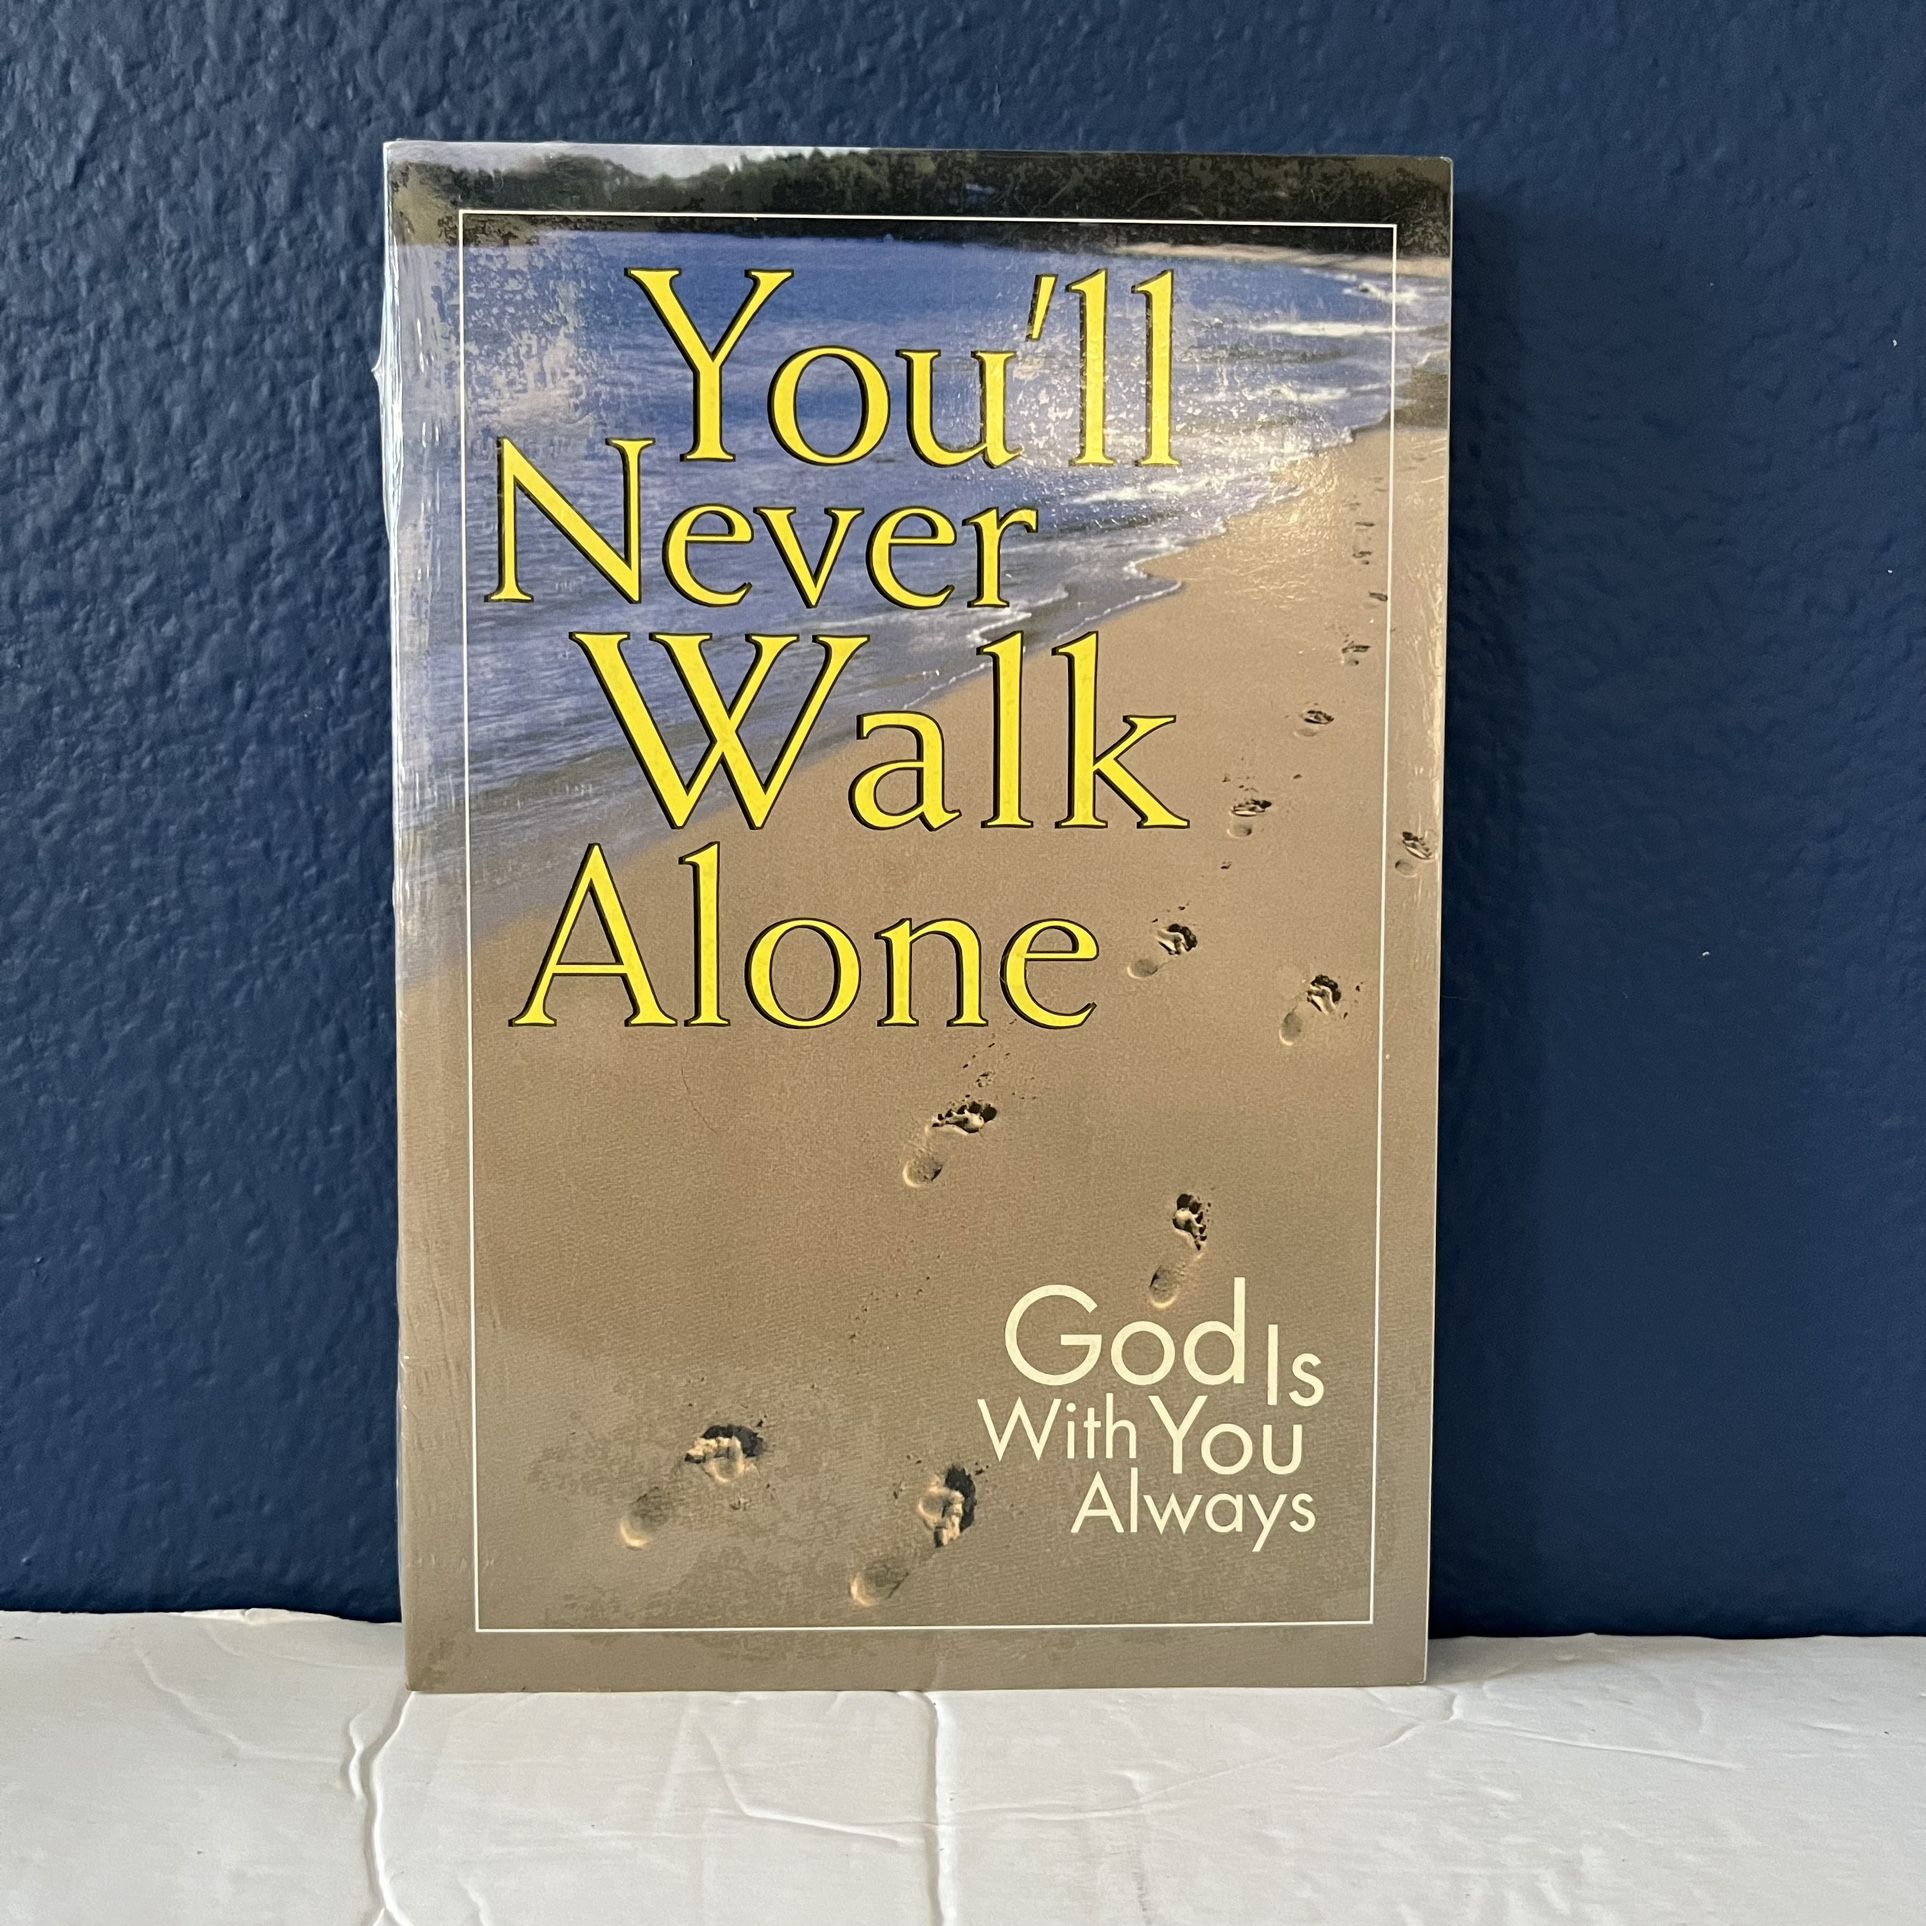 You'll Never Walk Alone: God Is Always with You